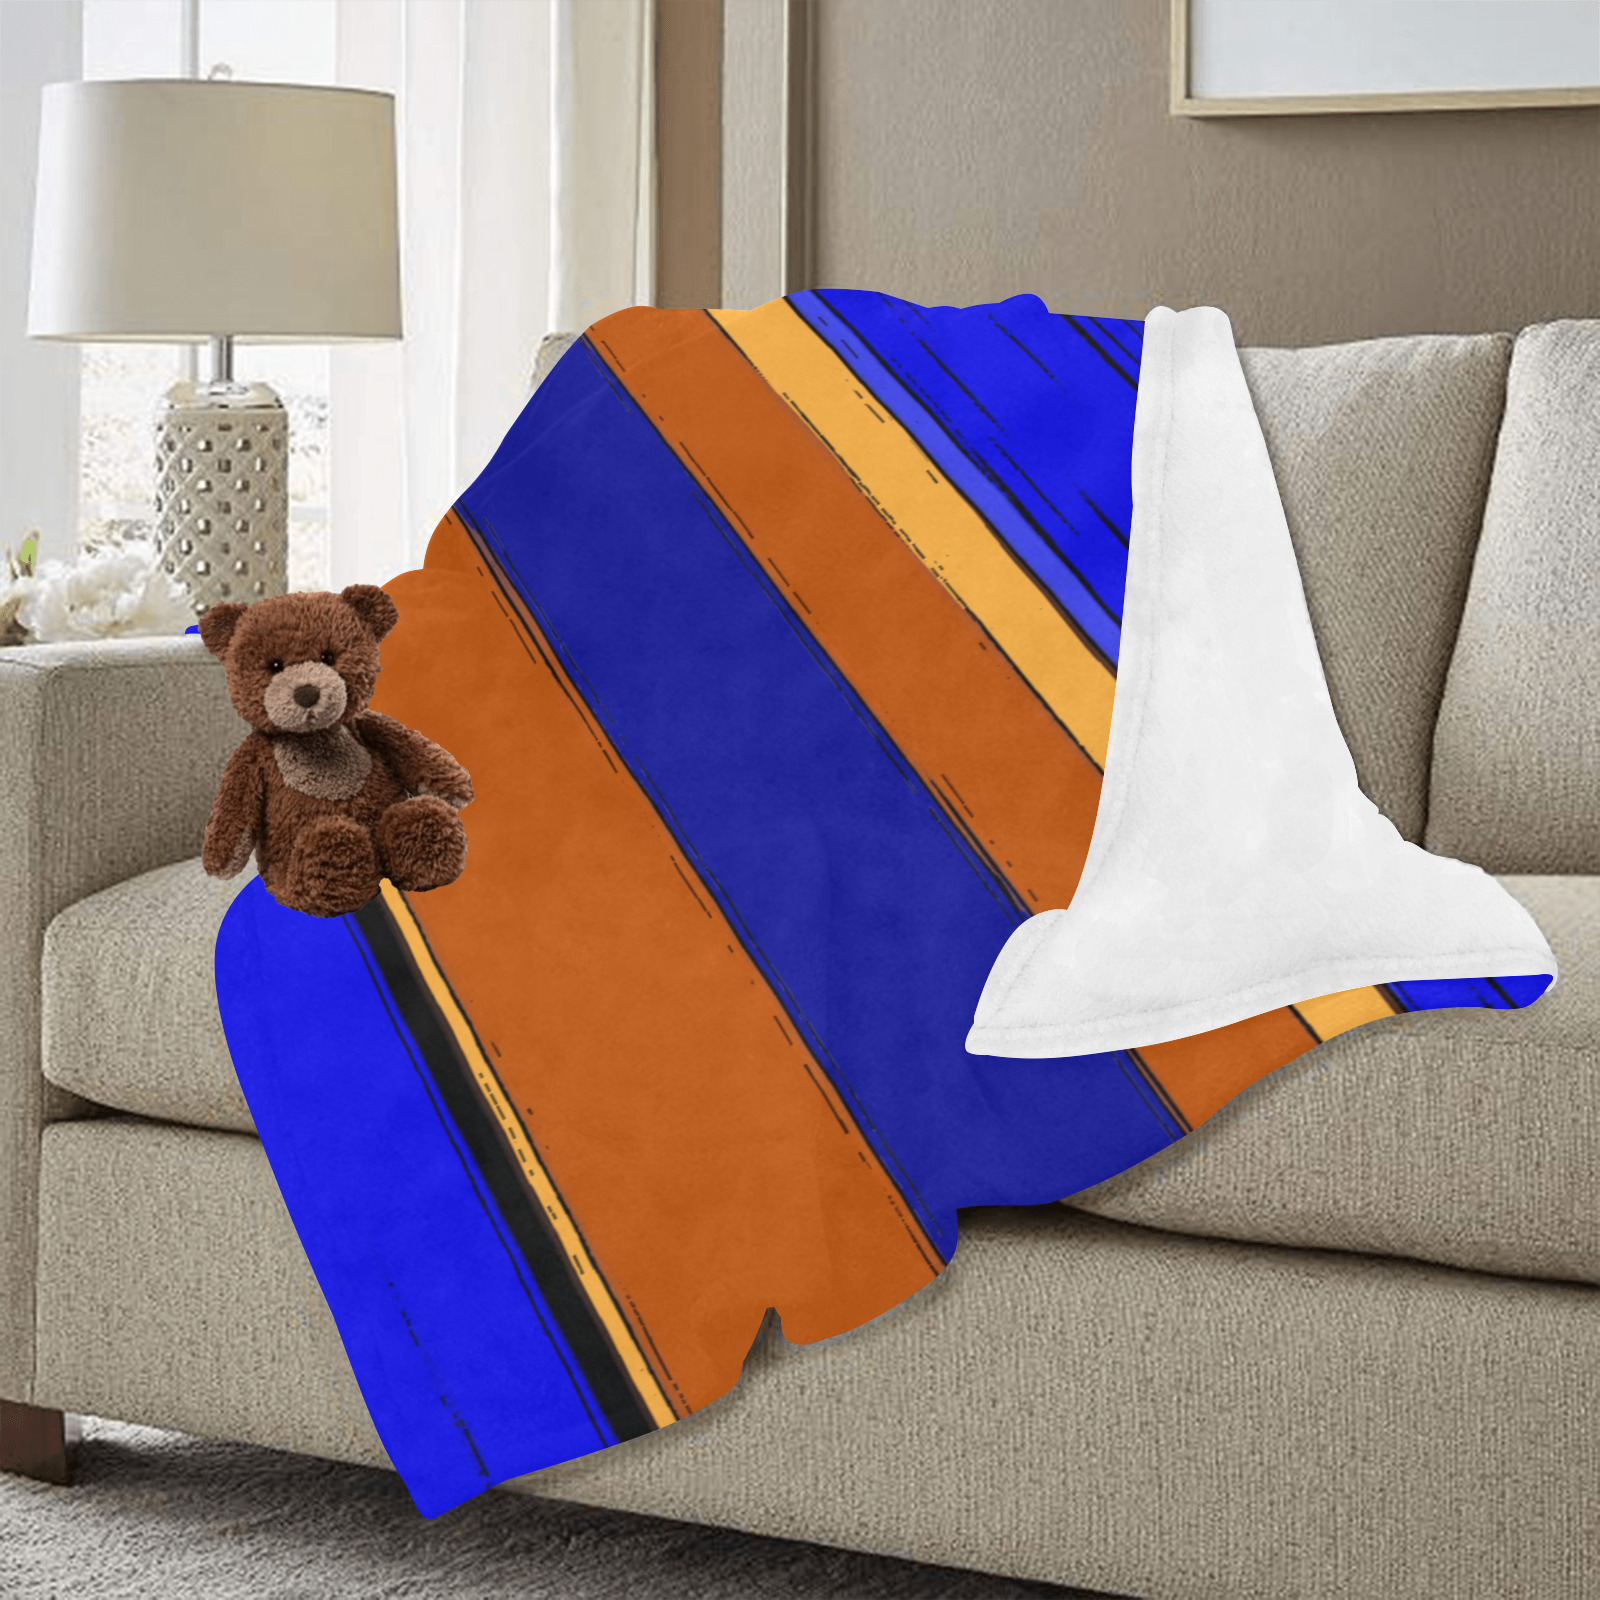 Abstract Blue And Orange 930 Ultra-Soft Micro Fleece Blanket 30"x40" (Thick)